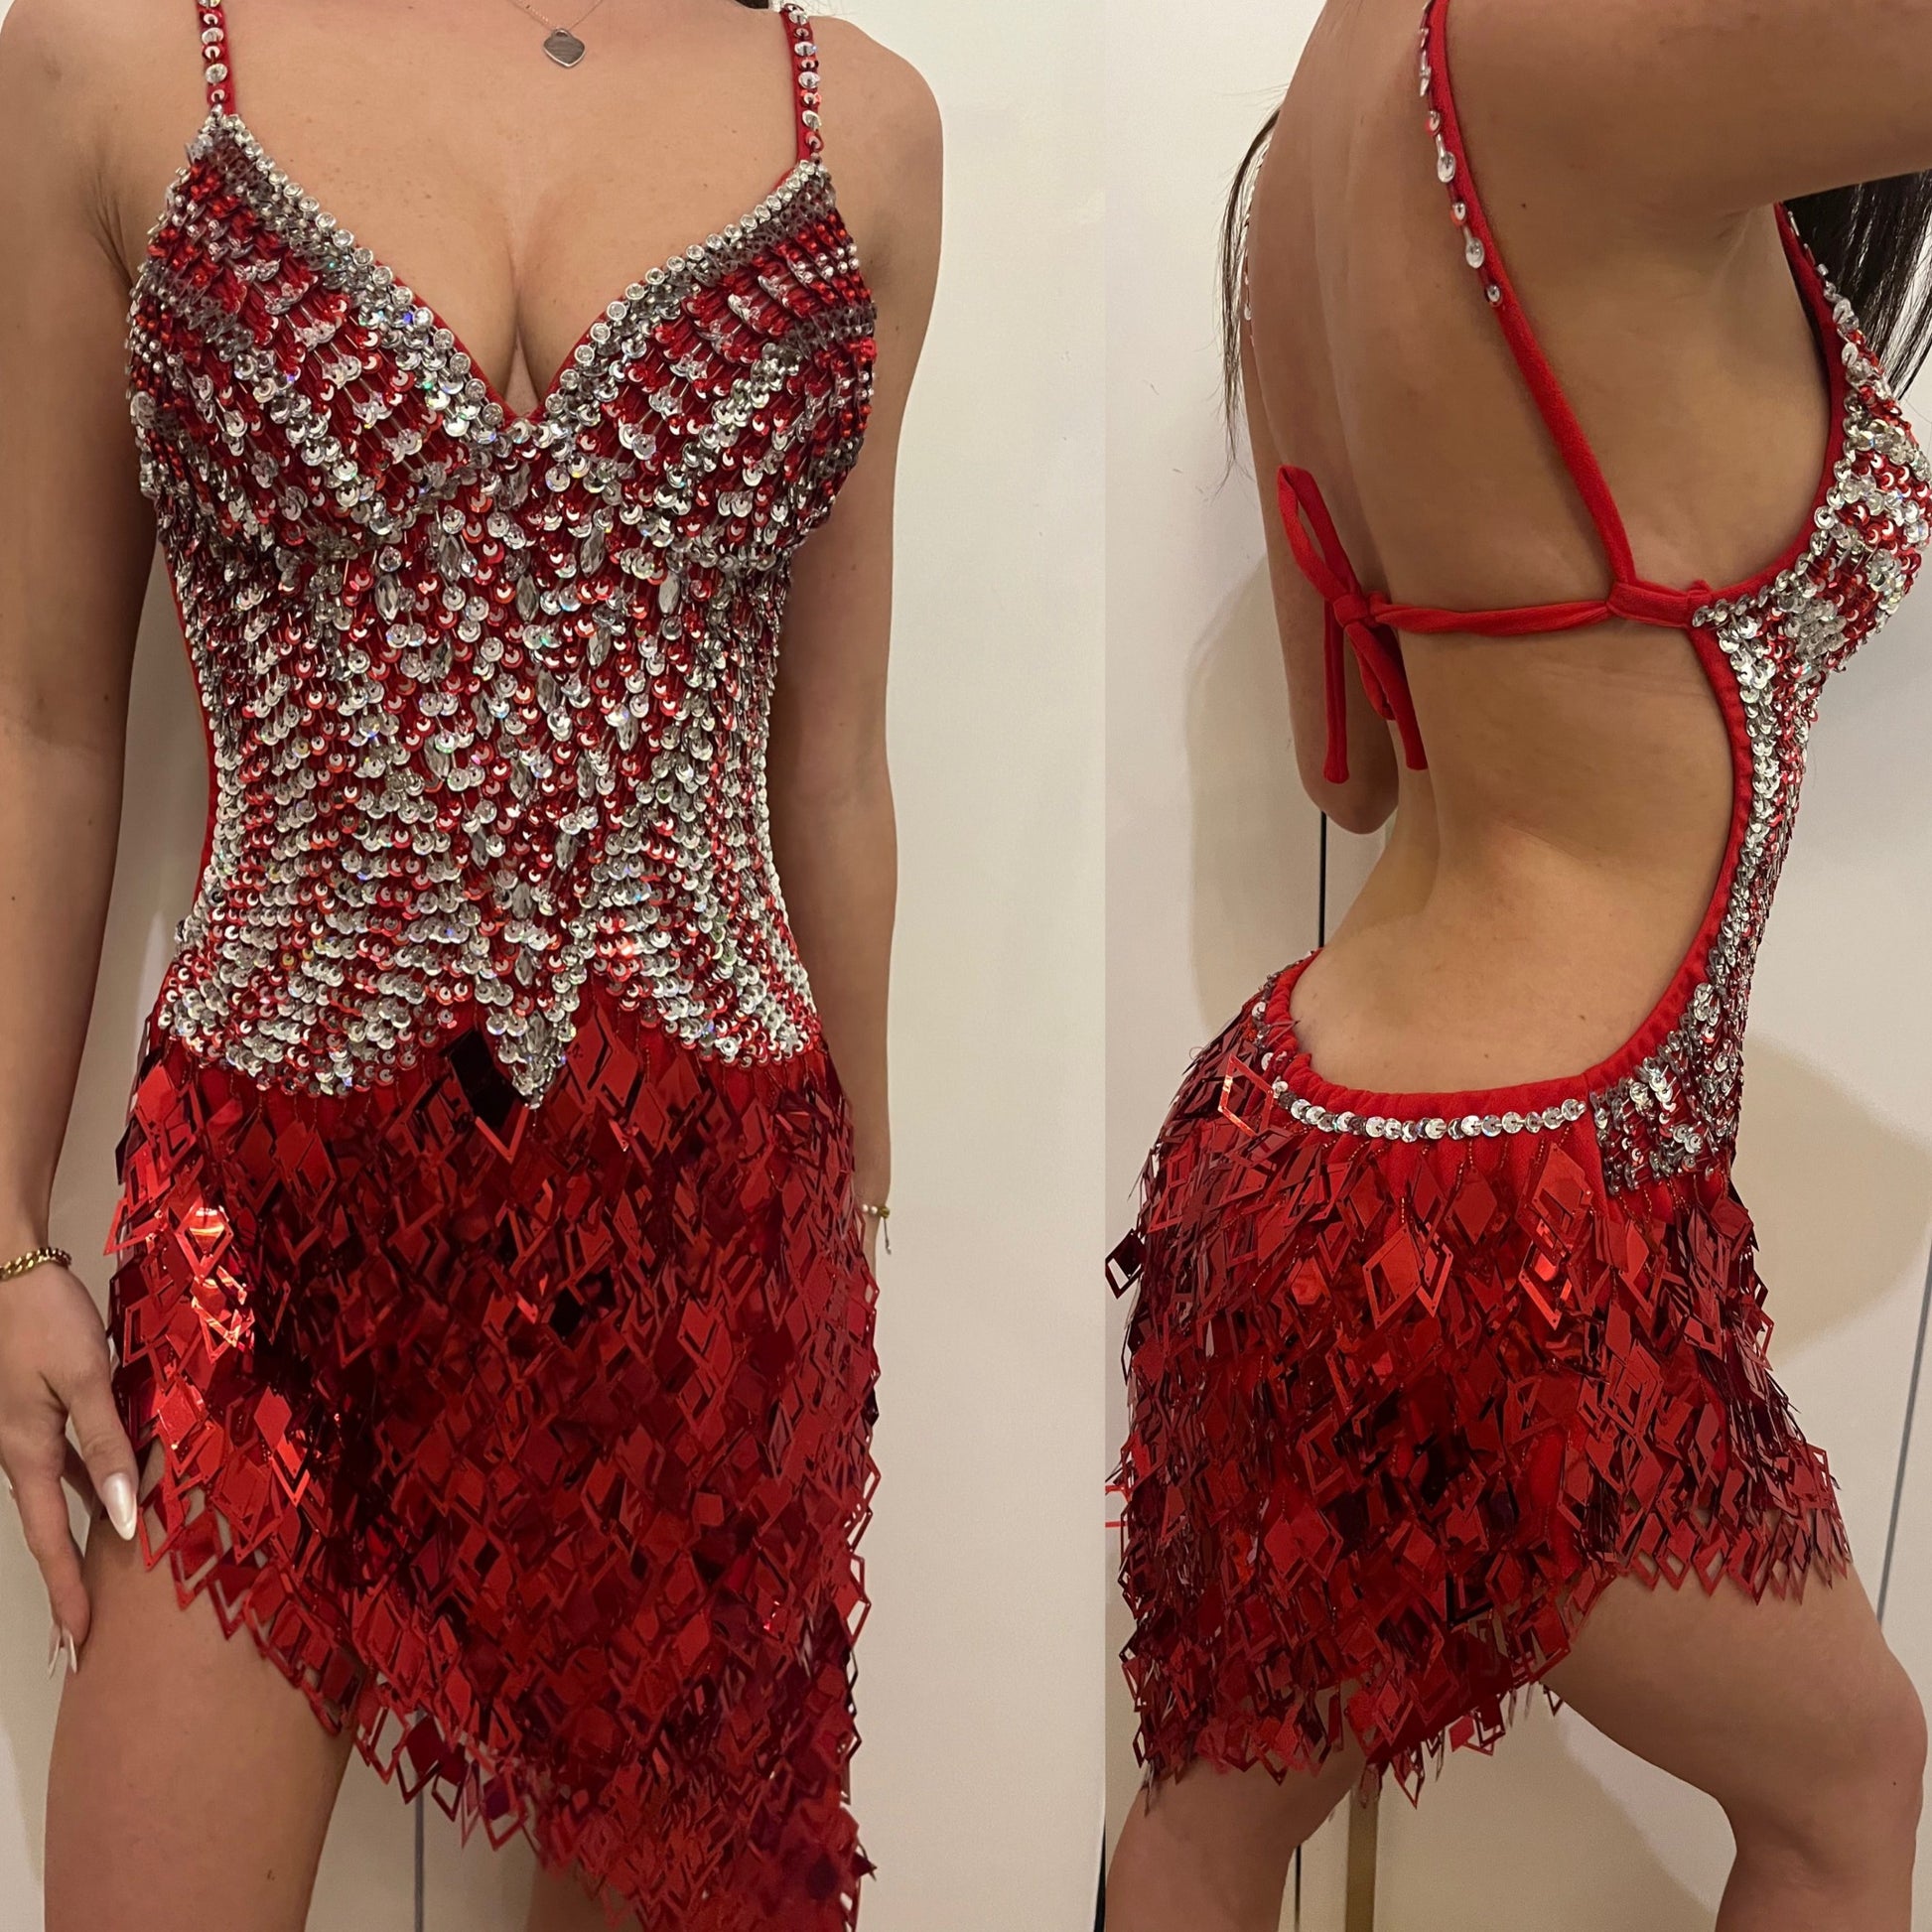 Radiant Red and Silver Sequined Latin Dance Dress, red latin dress, competition dress, rhythm dress, dance dresses for competition, sequin dress for sale